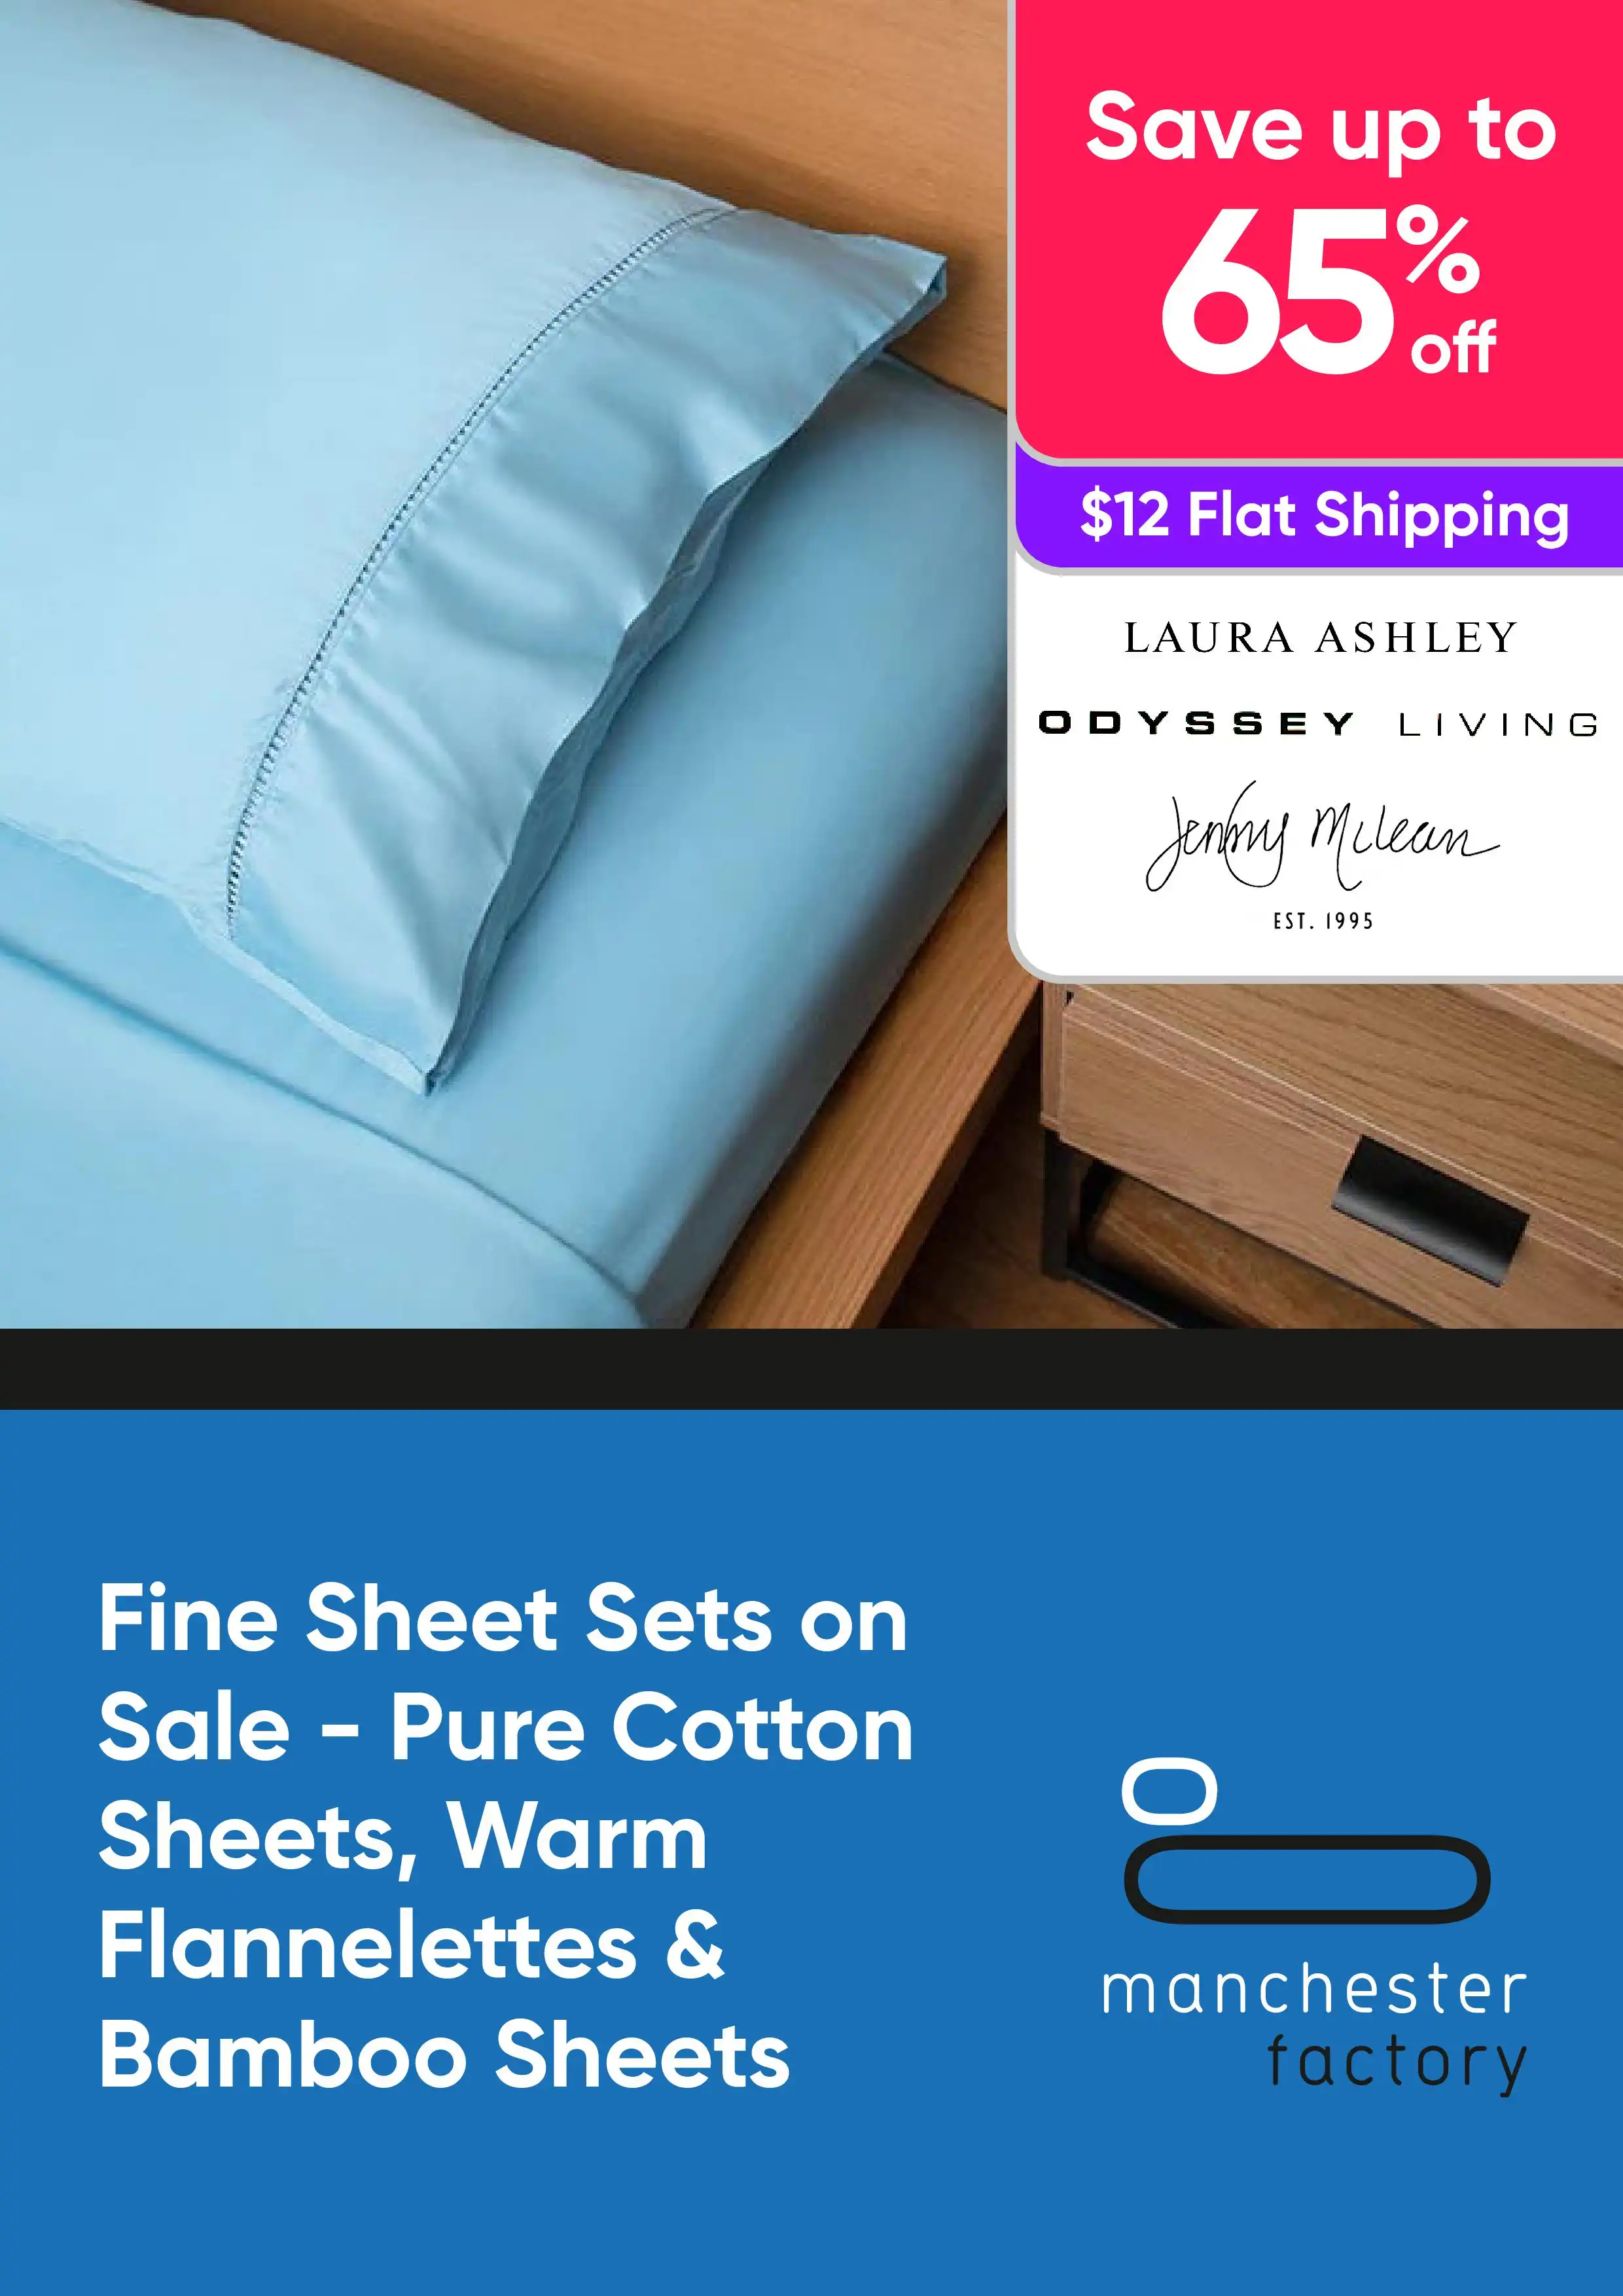 Fine Sheet Sets on Sale Now - Save up to 65%